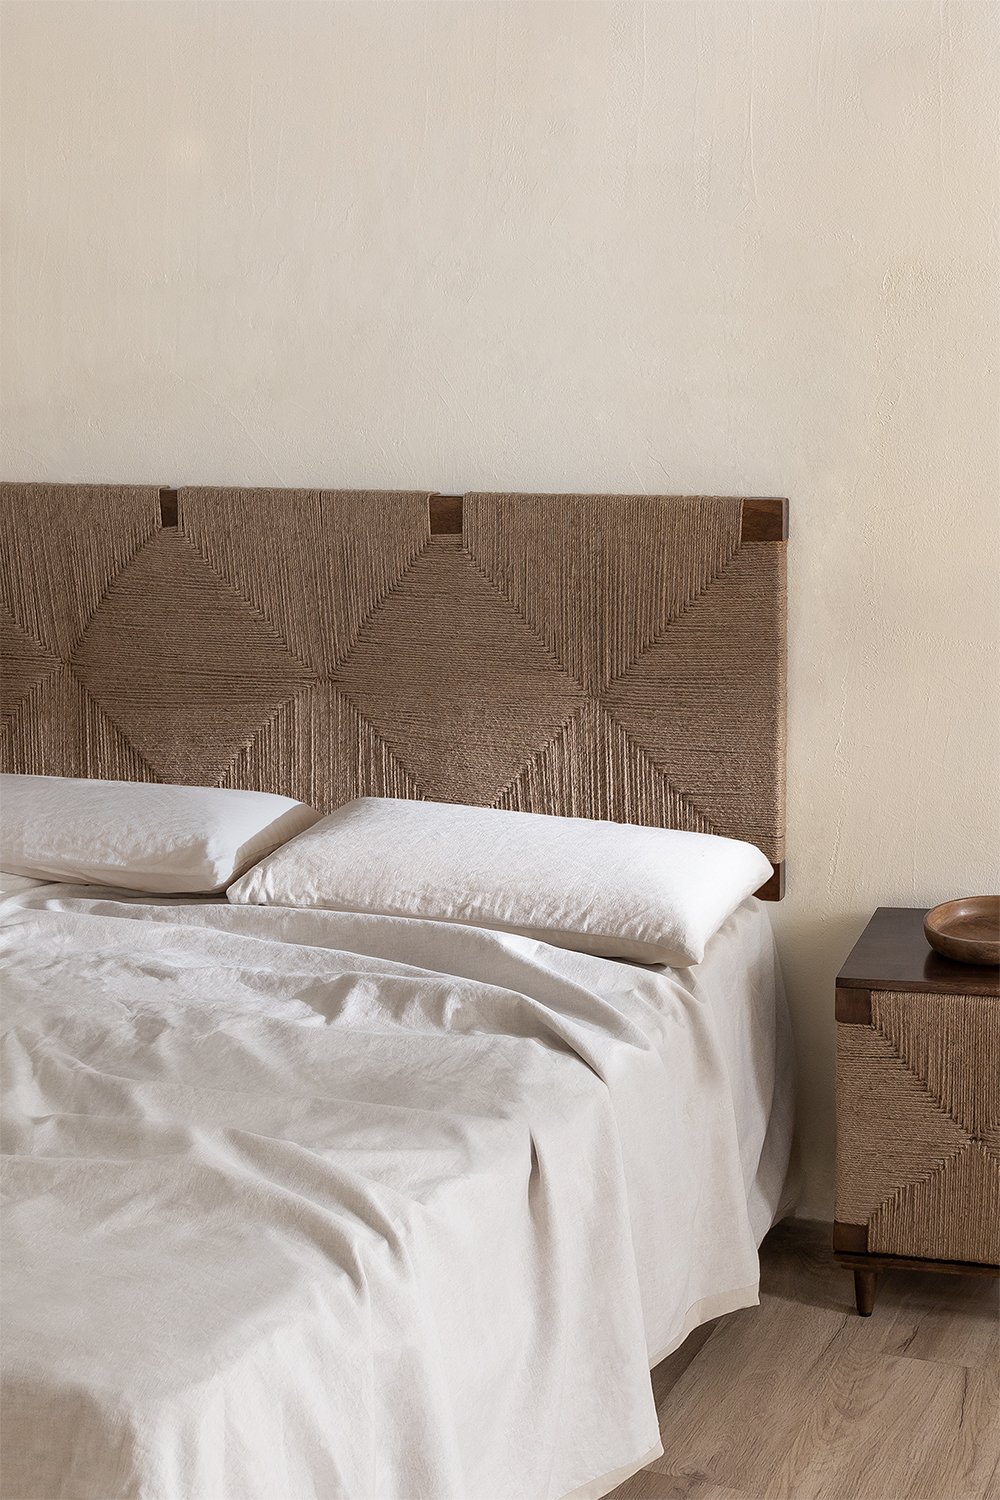 Mango Wood and Jute Headboard for 150 cm Bed Evans, gallery image 1